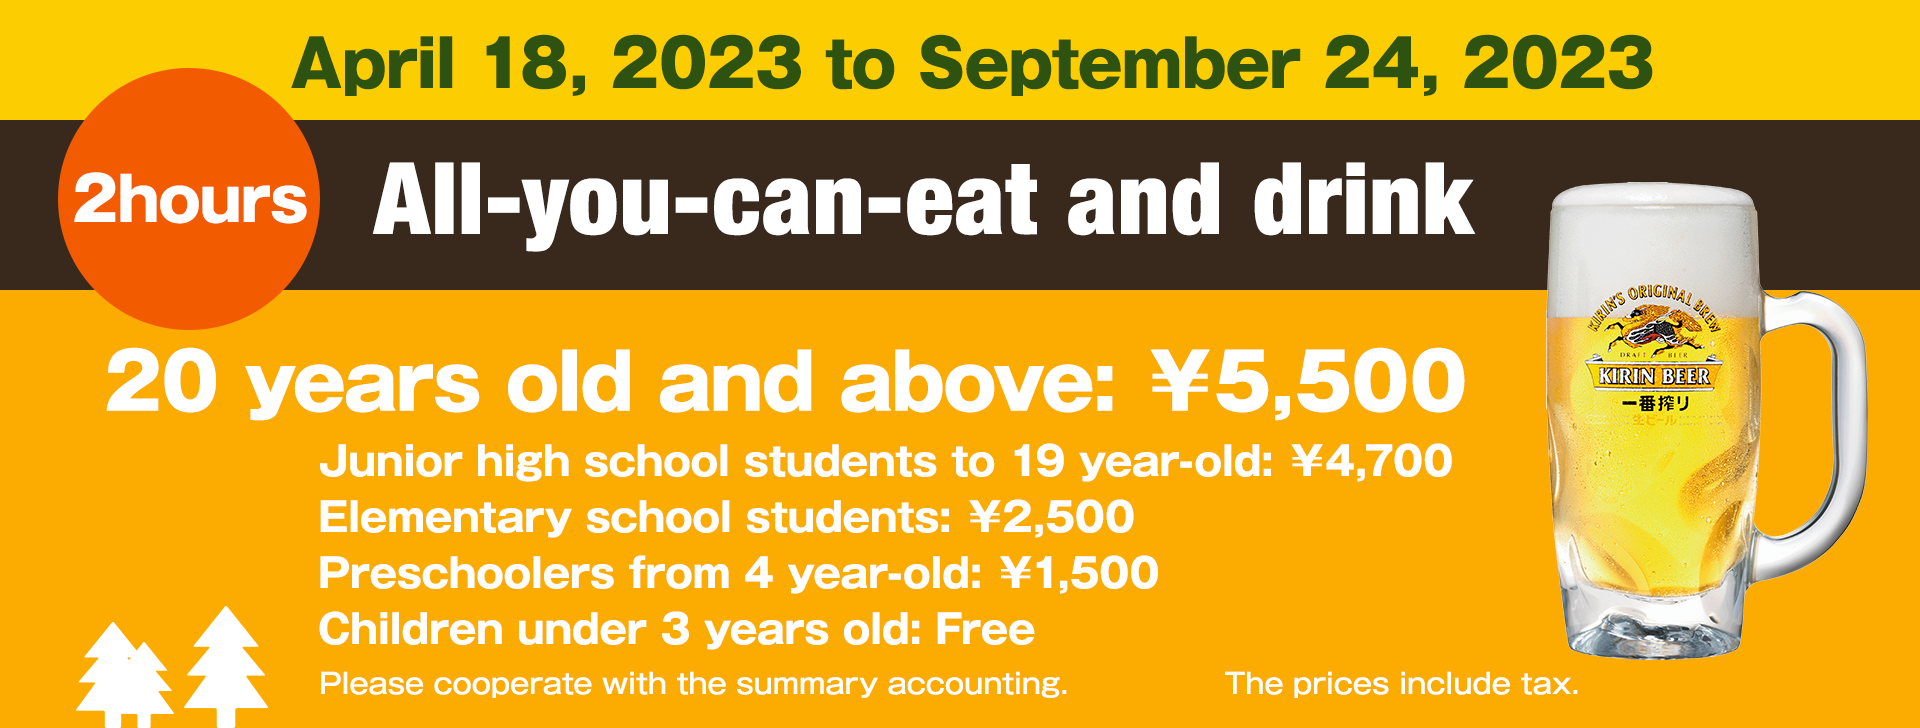 April 27, 2022 to September 25, 2022 All-you-can-eat and drink for 2 hours Price 20 years old and above: 4,800 yen Junior high school students to 19 year-old: 4000 yen Elementary school students: 2000 yen Preschoolers from 4 year-old: 1000 yen Children under 3 years old: Free The prices include tax.